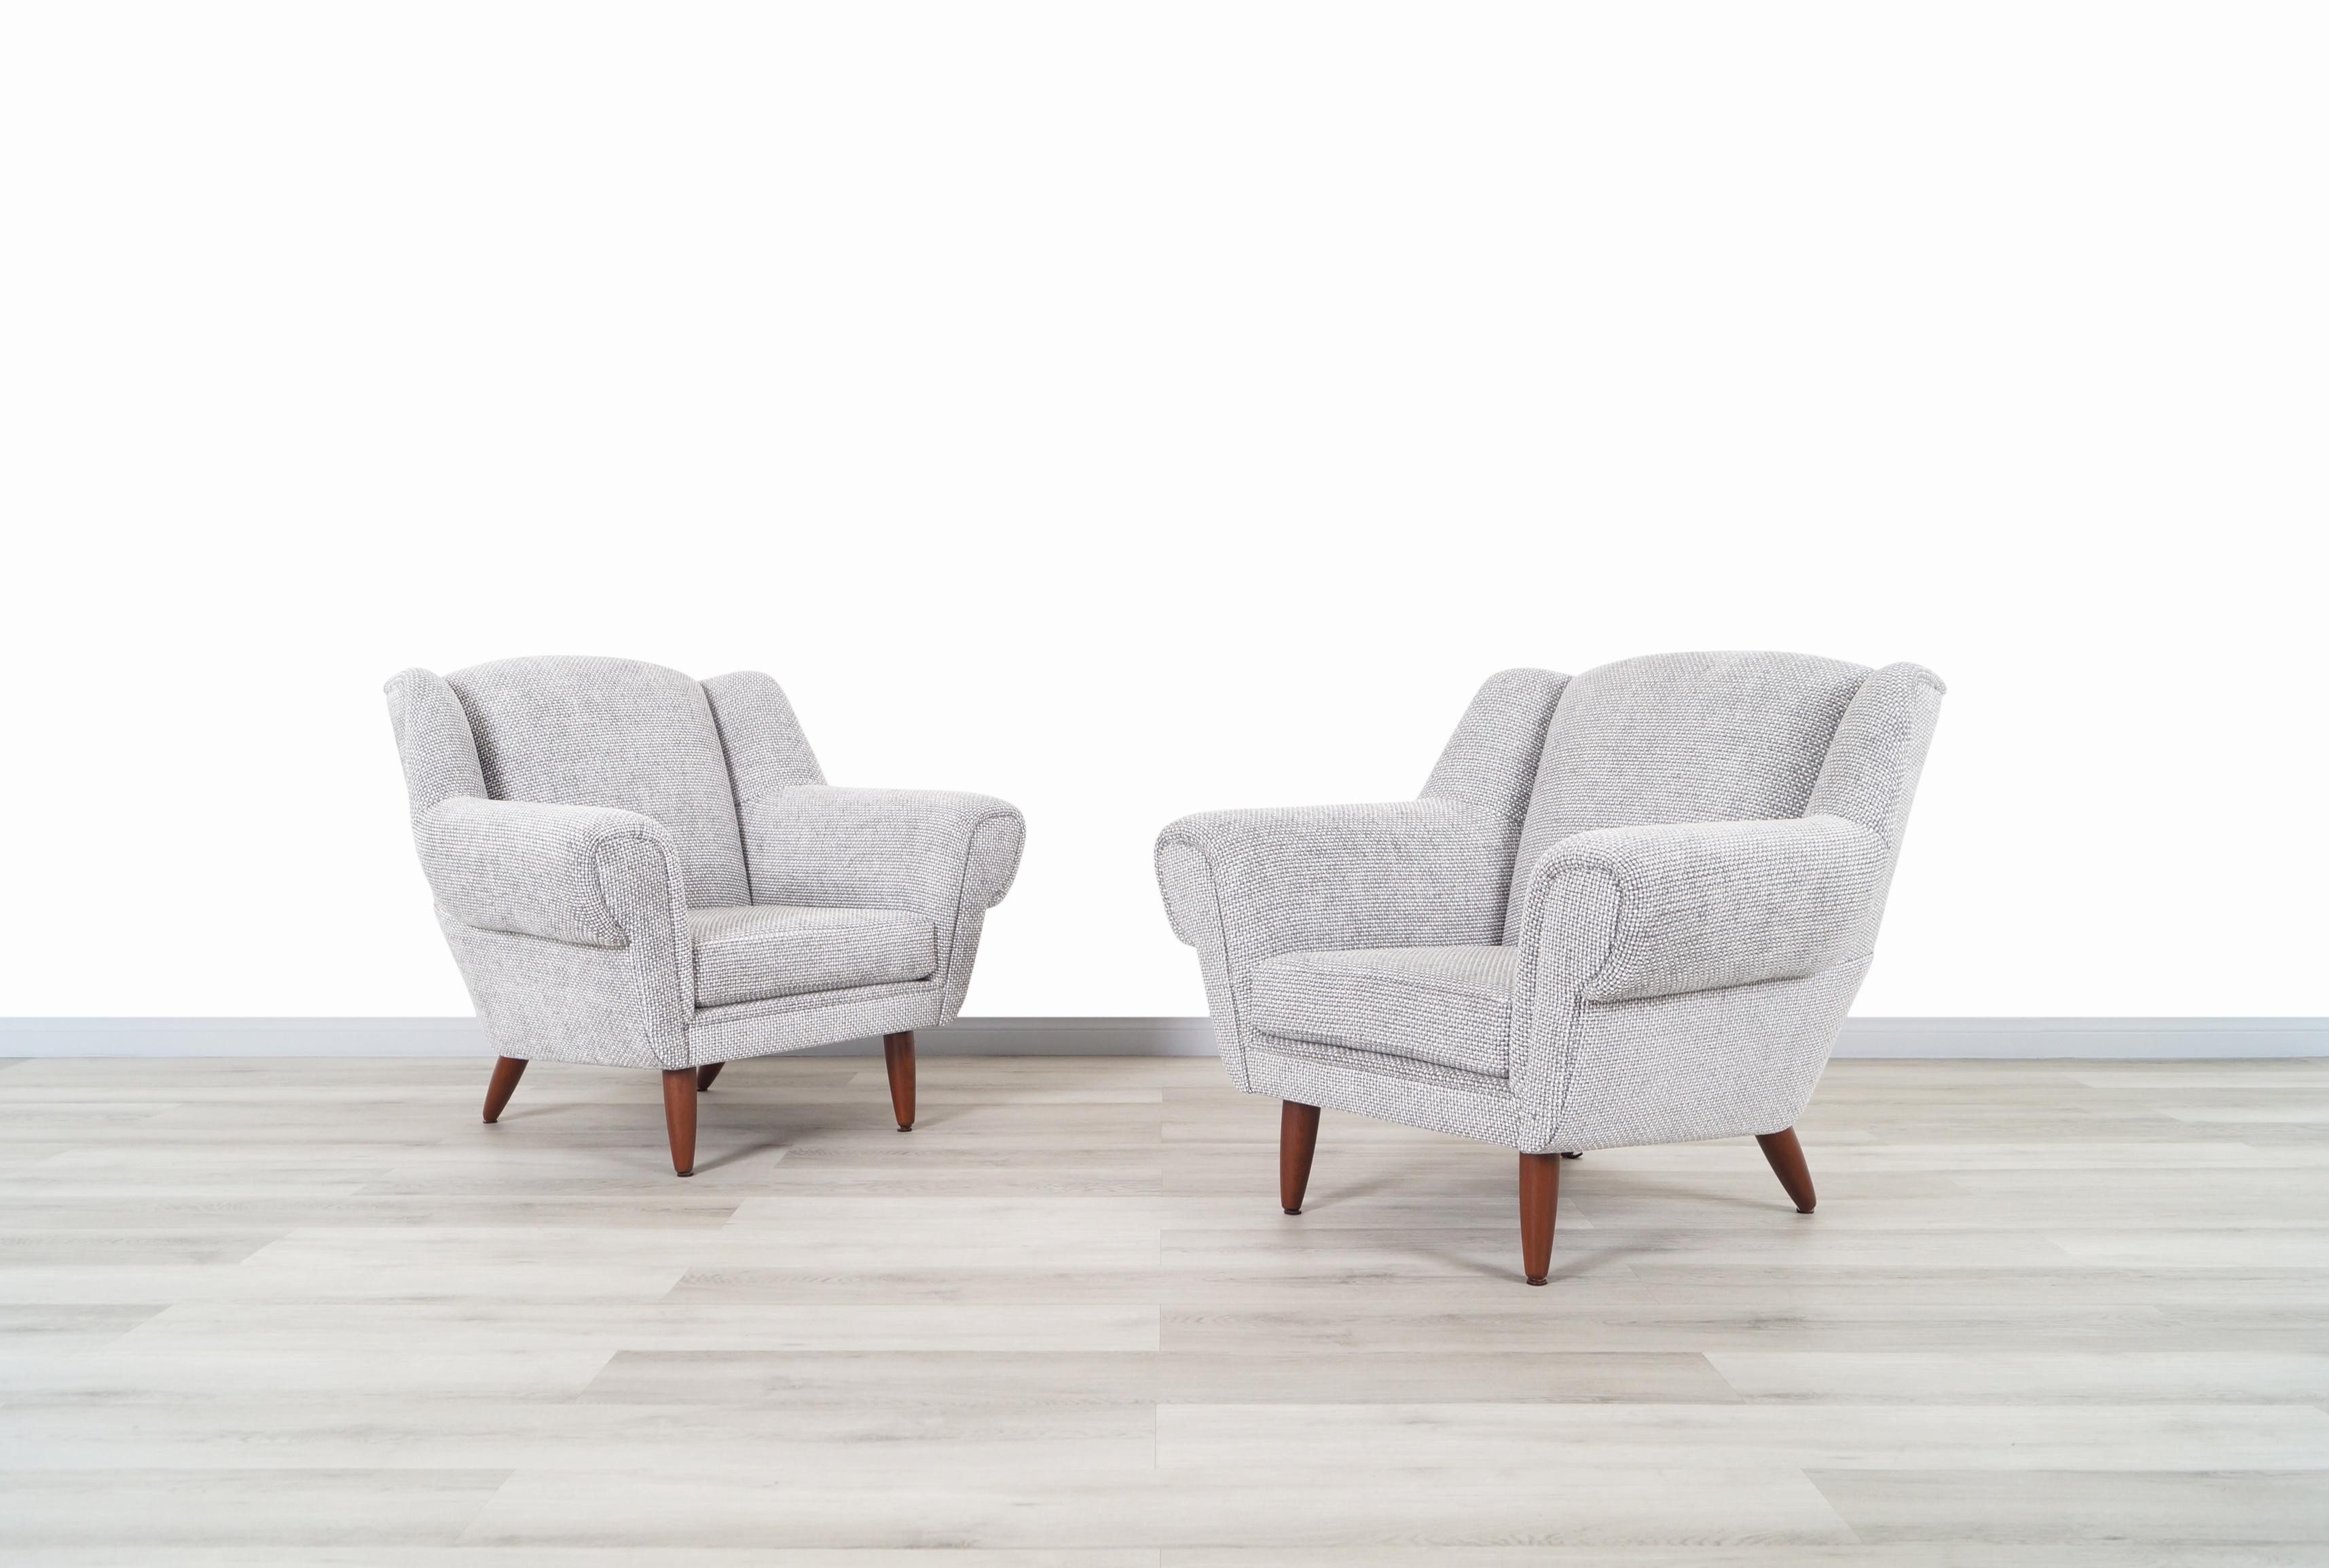 A pair of beautiful Mid-Century Modern lounge chairs manufactured in Denmark, circa 1960s. Feature a cozy feel and a number of curved details that give the pieces a delightful sculptural design. Each chair sits on four solid walnut thick rounded